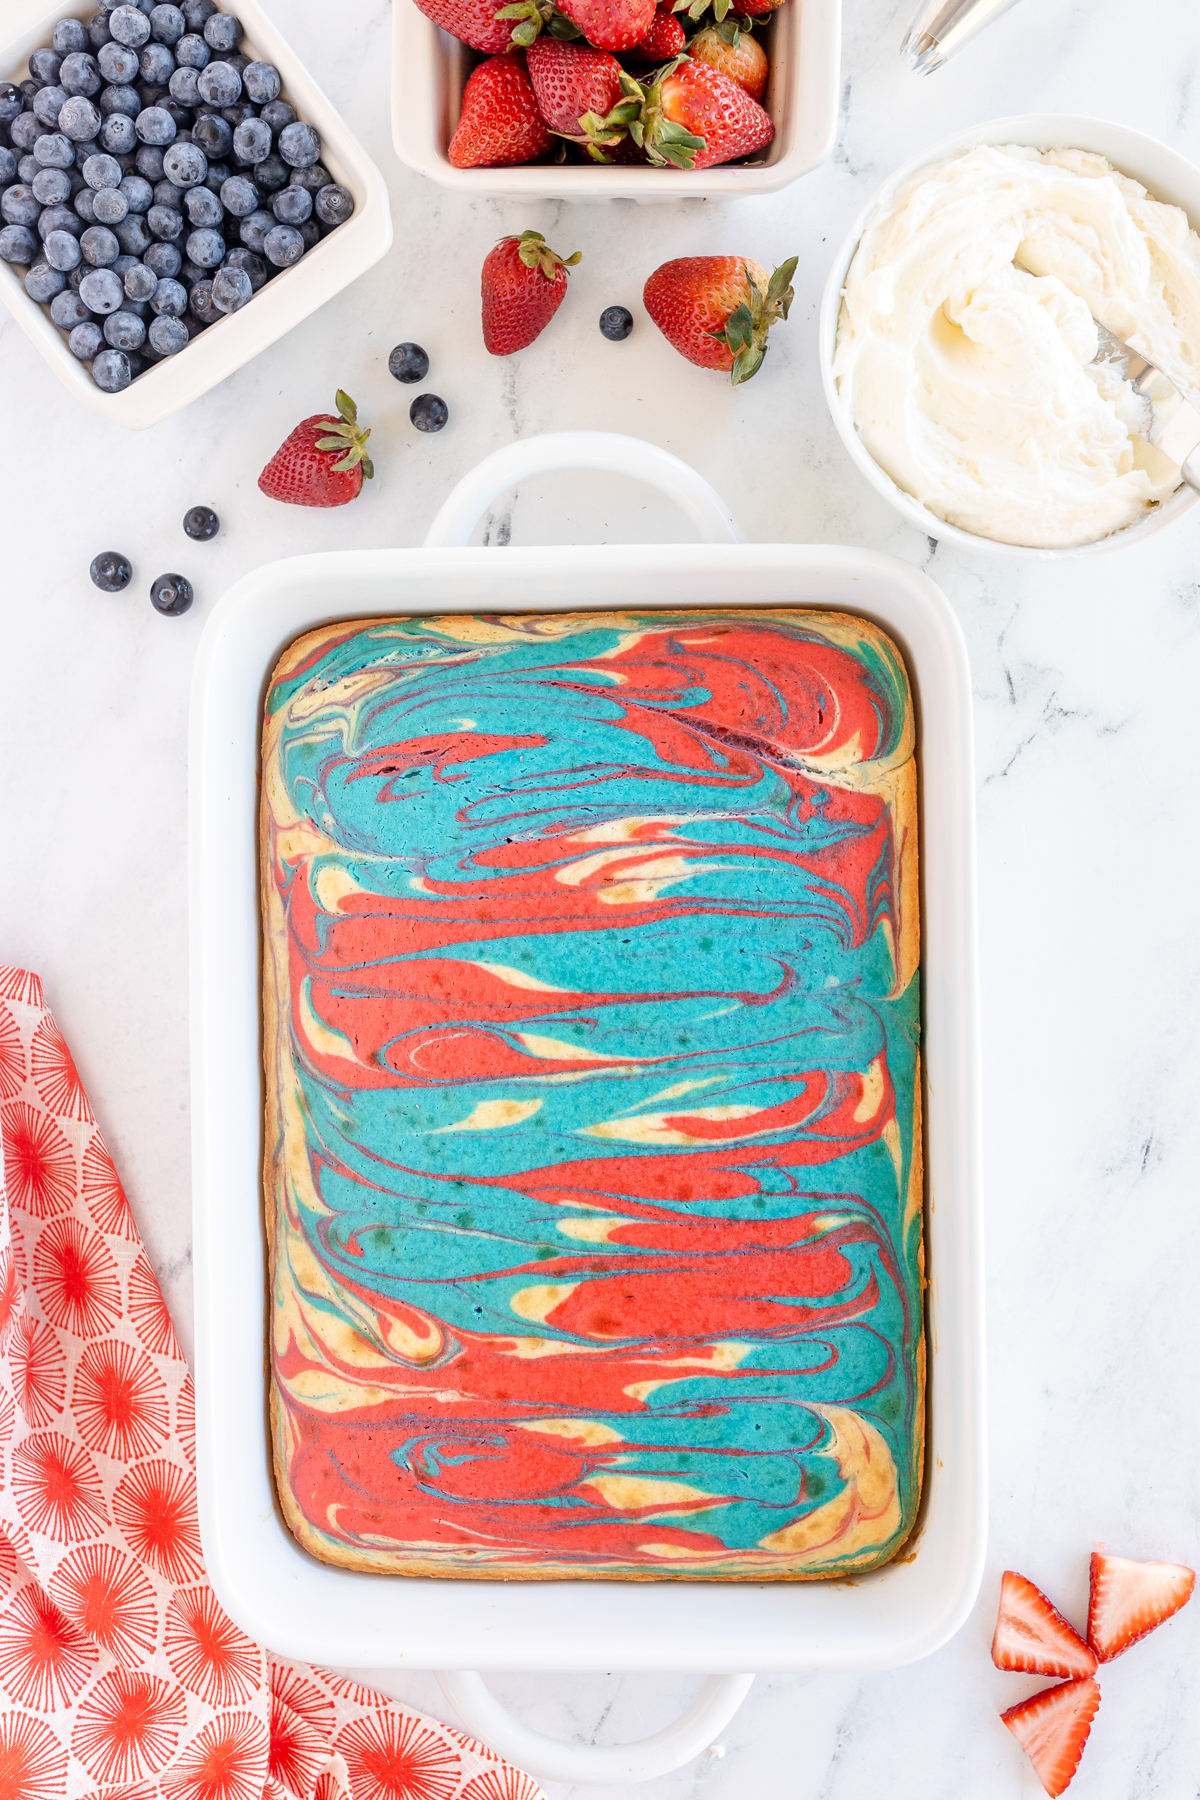 red white and blue swirl cake in a pan